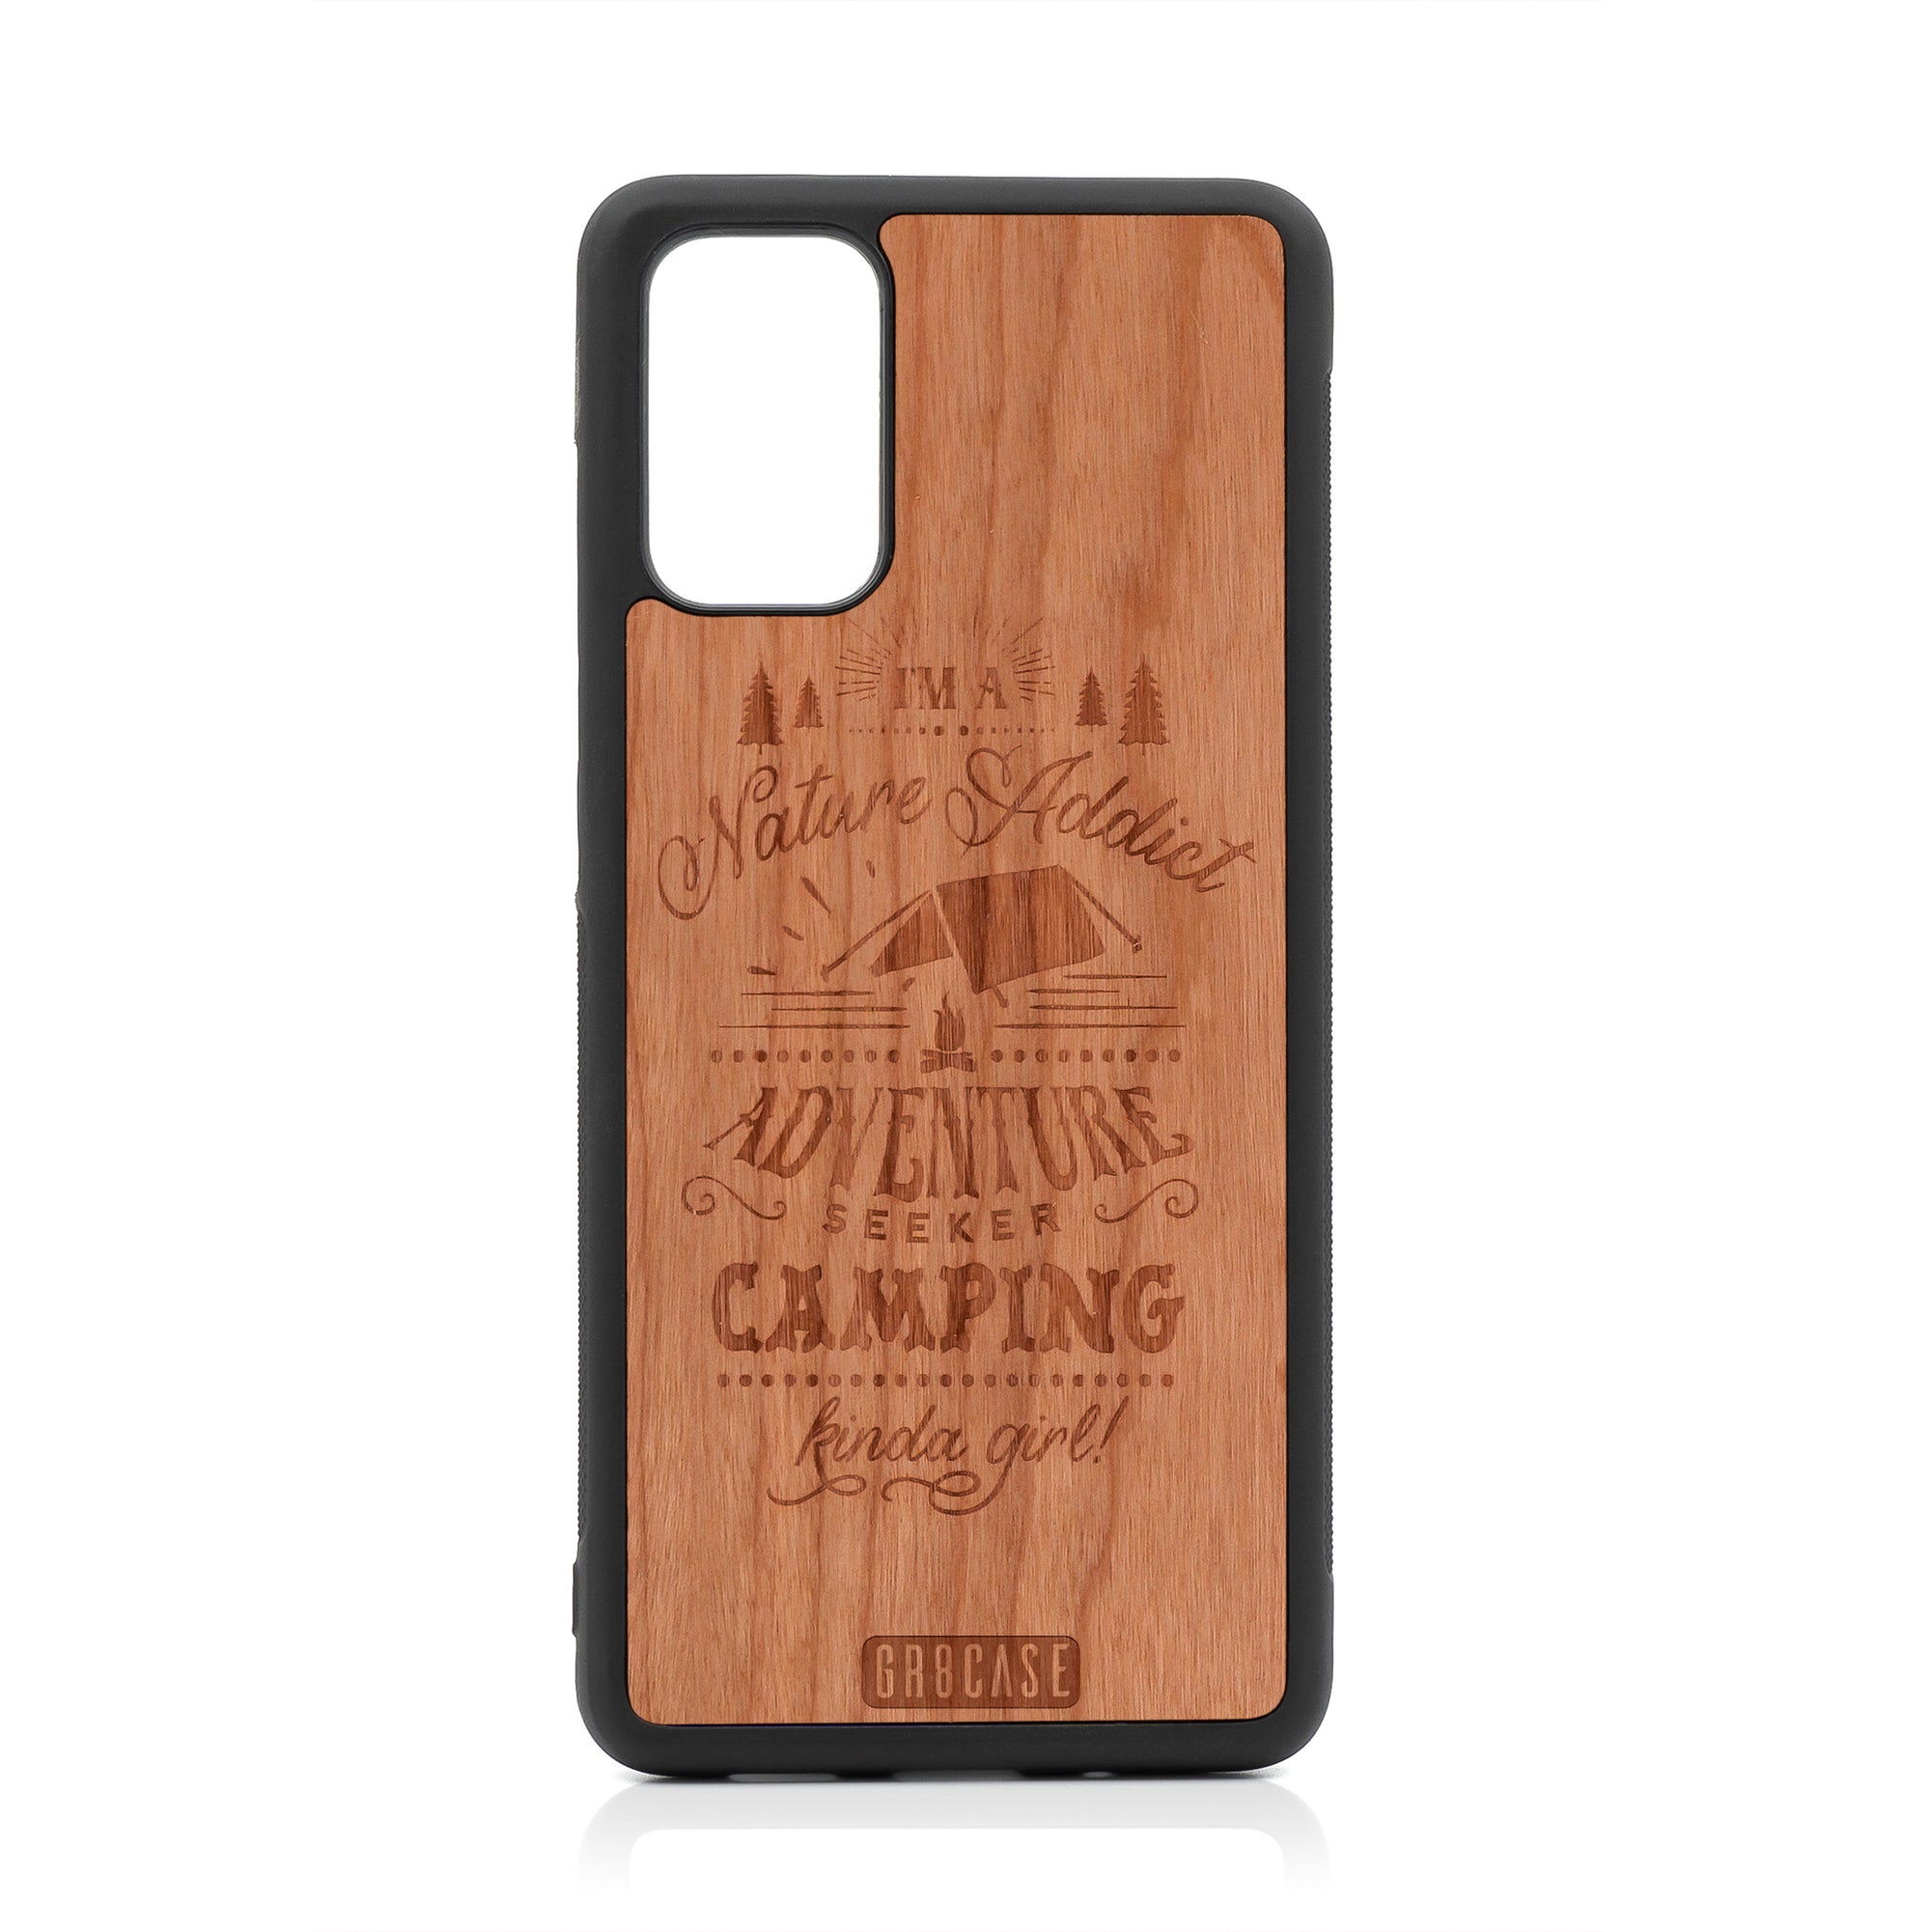 I'm A Nature Addict Adventure Seeker Camping Kinda Girl Design Wood Case For Samsung Galaxy S20 Plus by GR8CASE